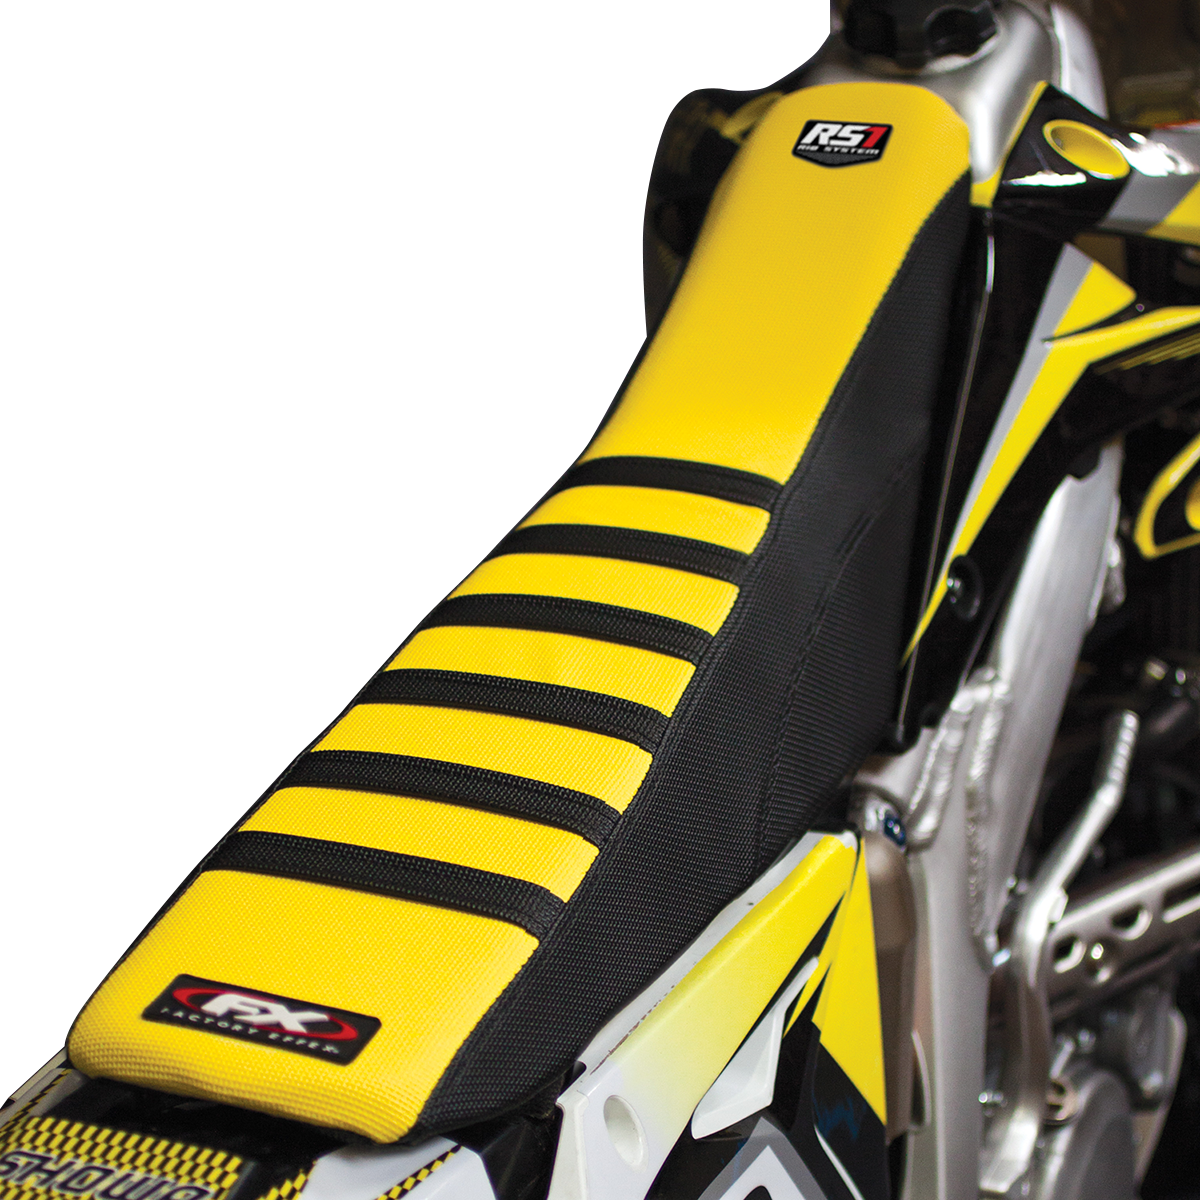 FACTORY EFFEX RS1 Seat Cover - KX 250/450F 18-29130